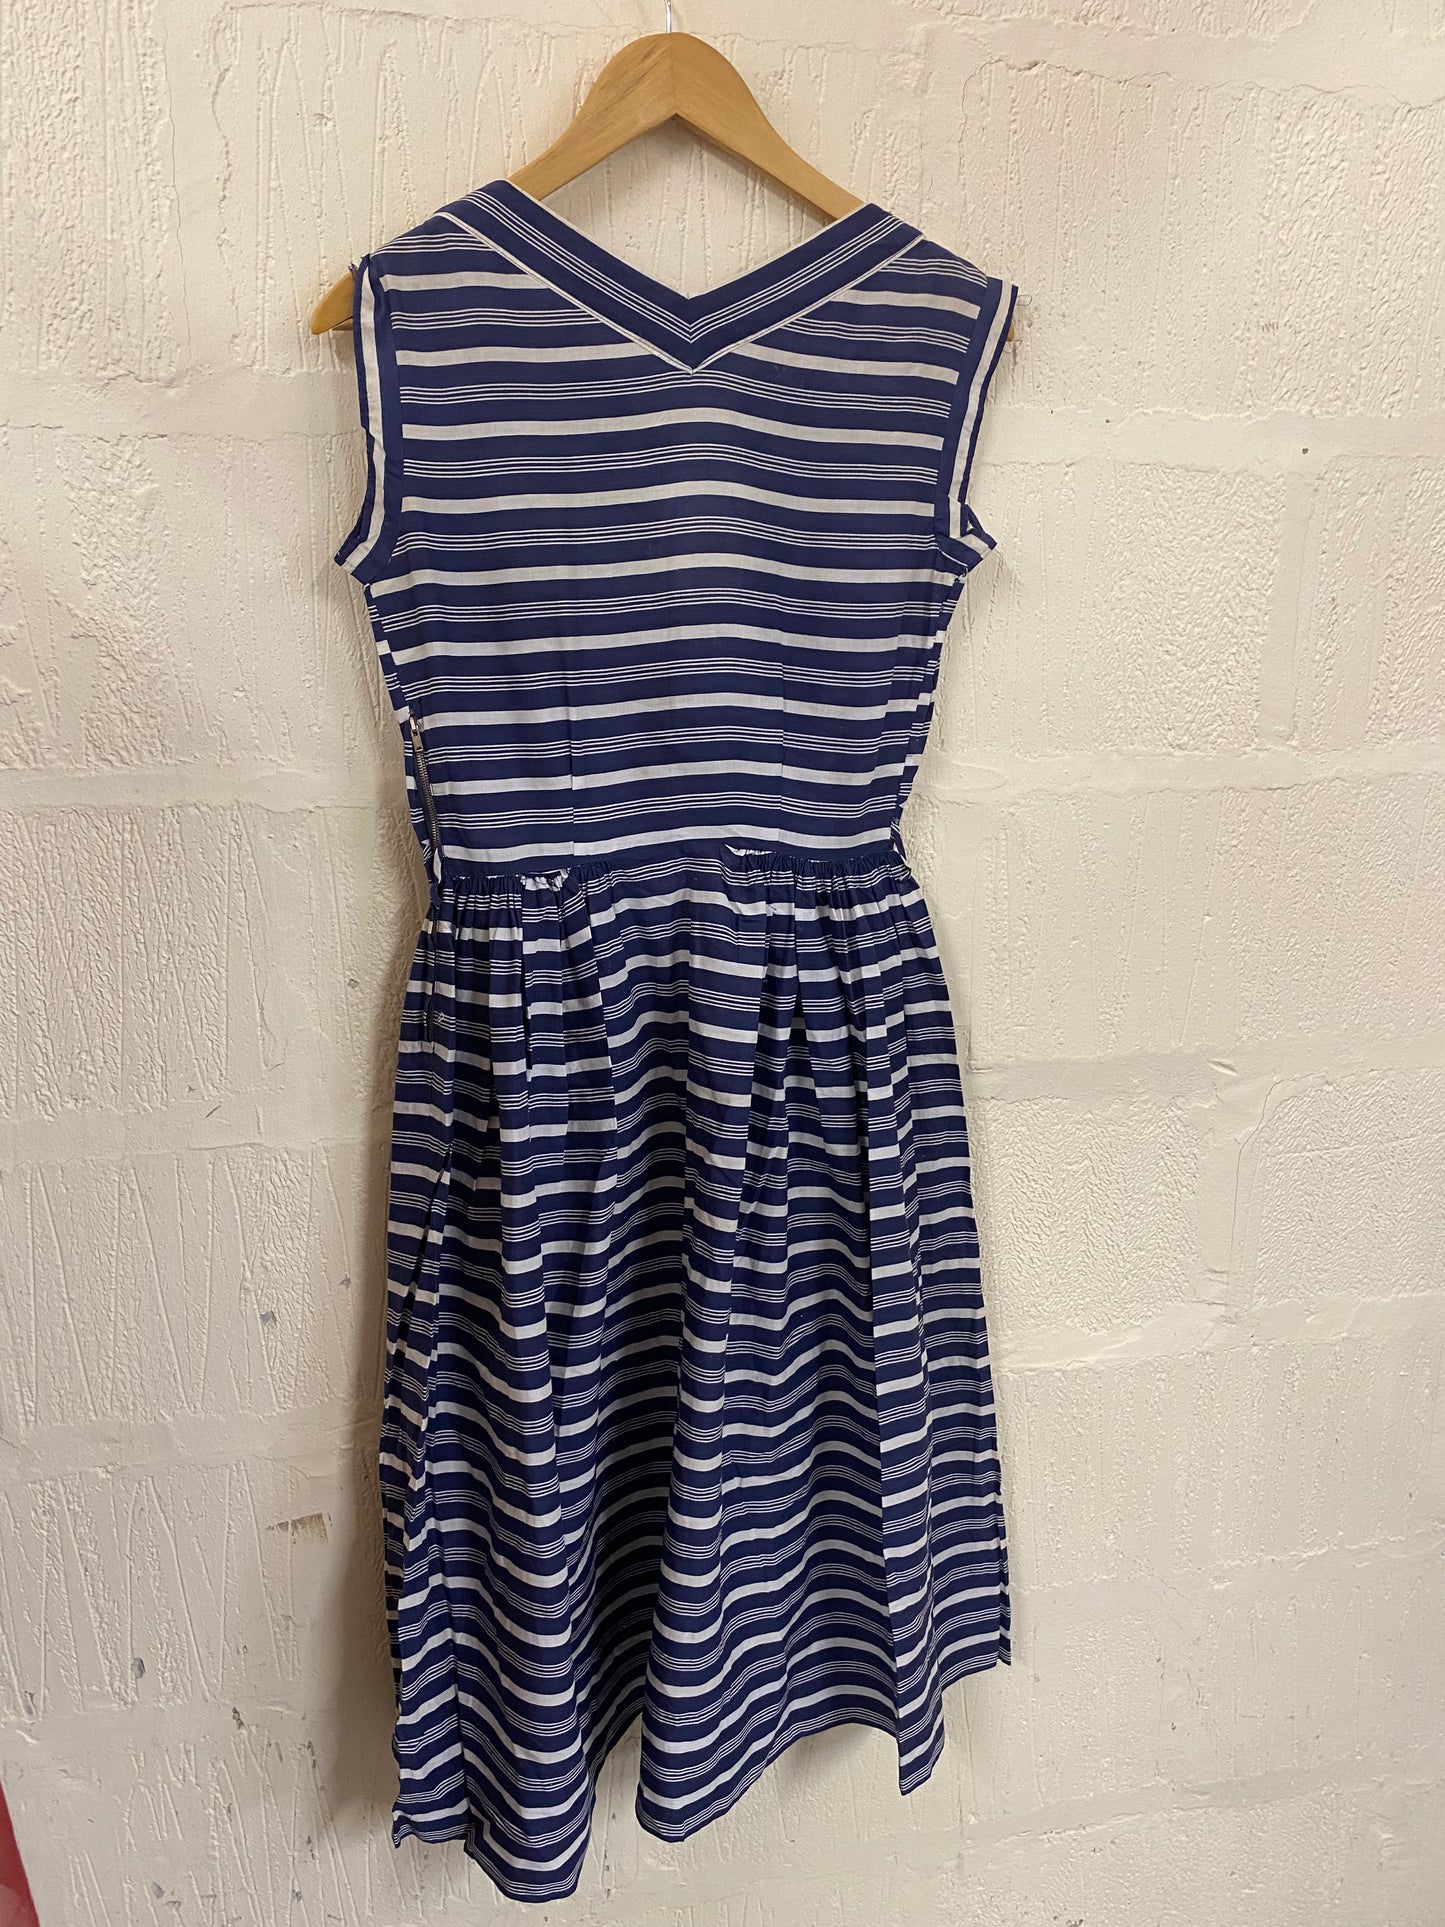 Vintage 1950s Blue and White 1950s Hand Made dress Size 6